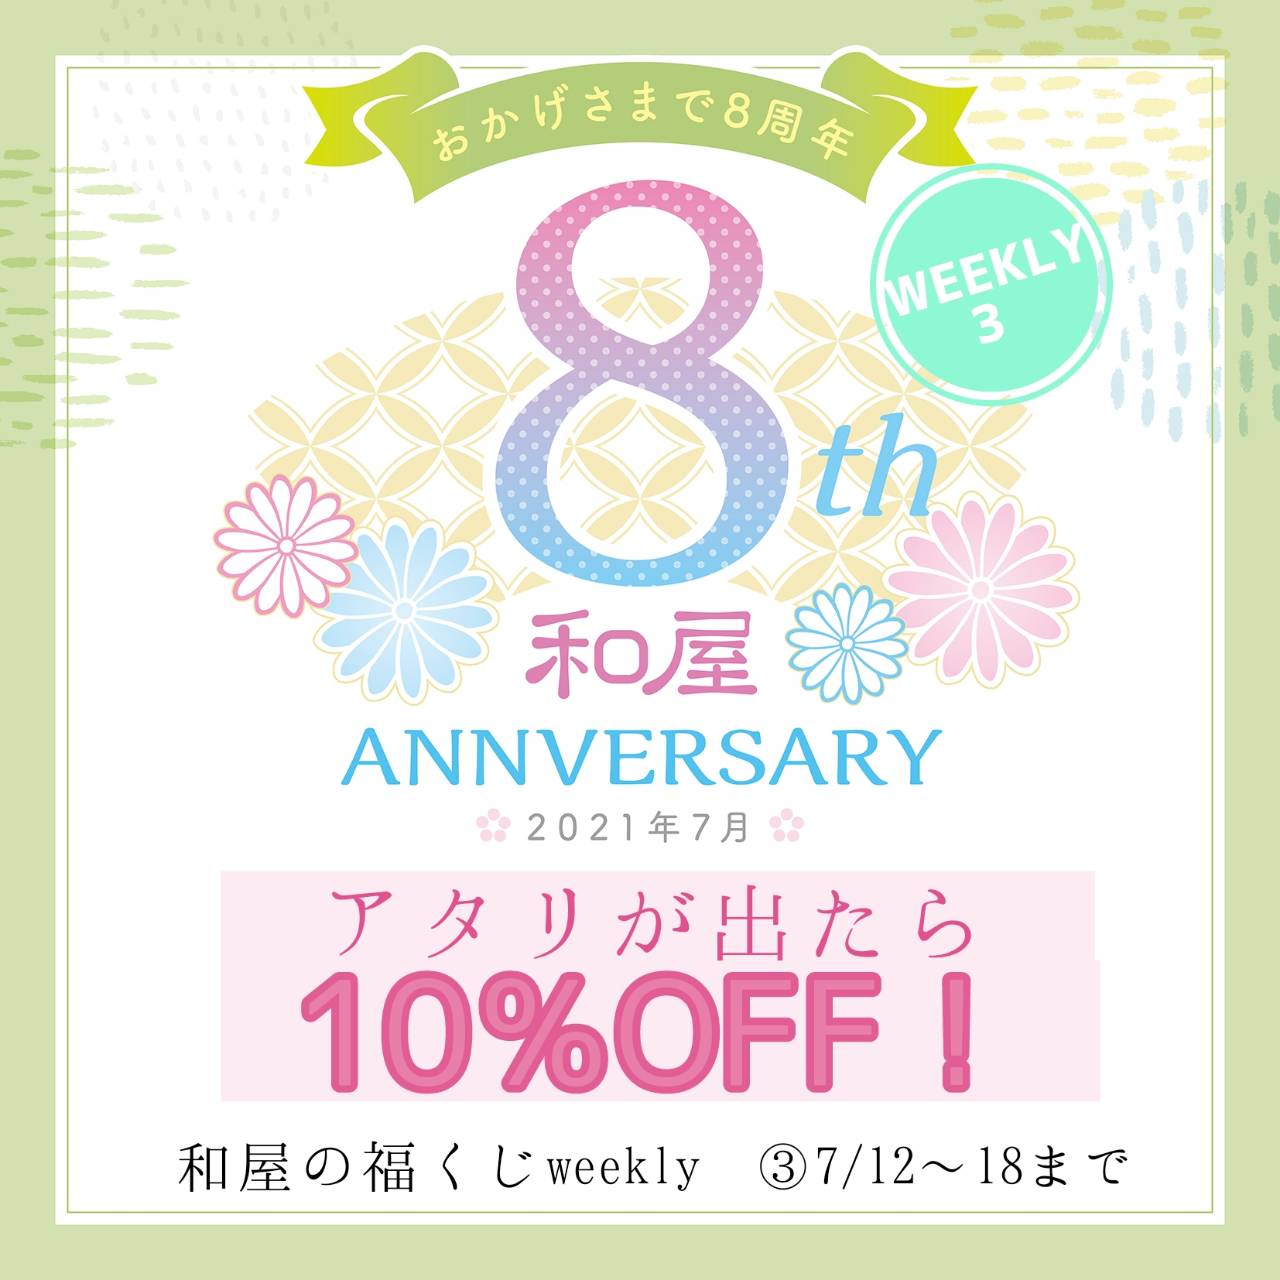 weeklyくじ【3週目！】12日～18日は10％OFF！